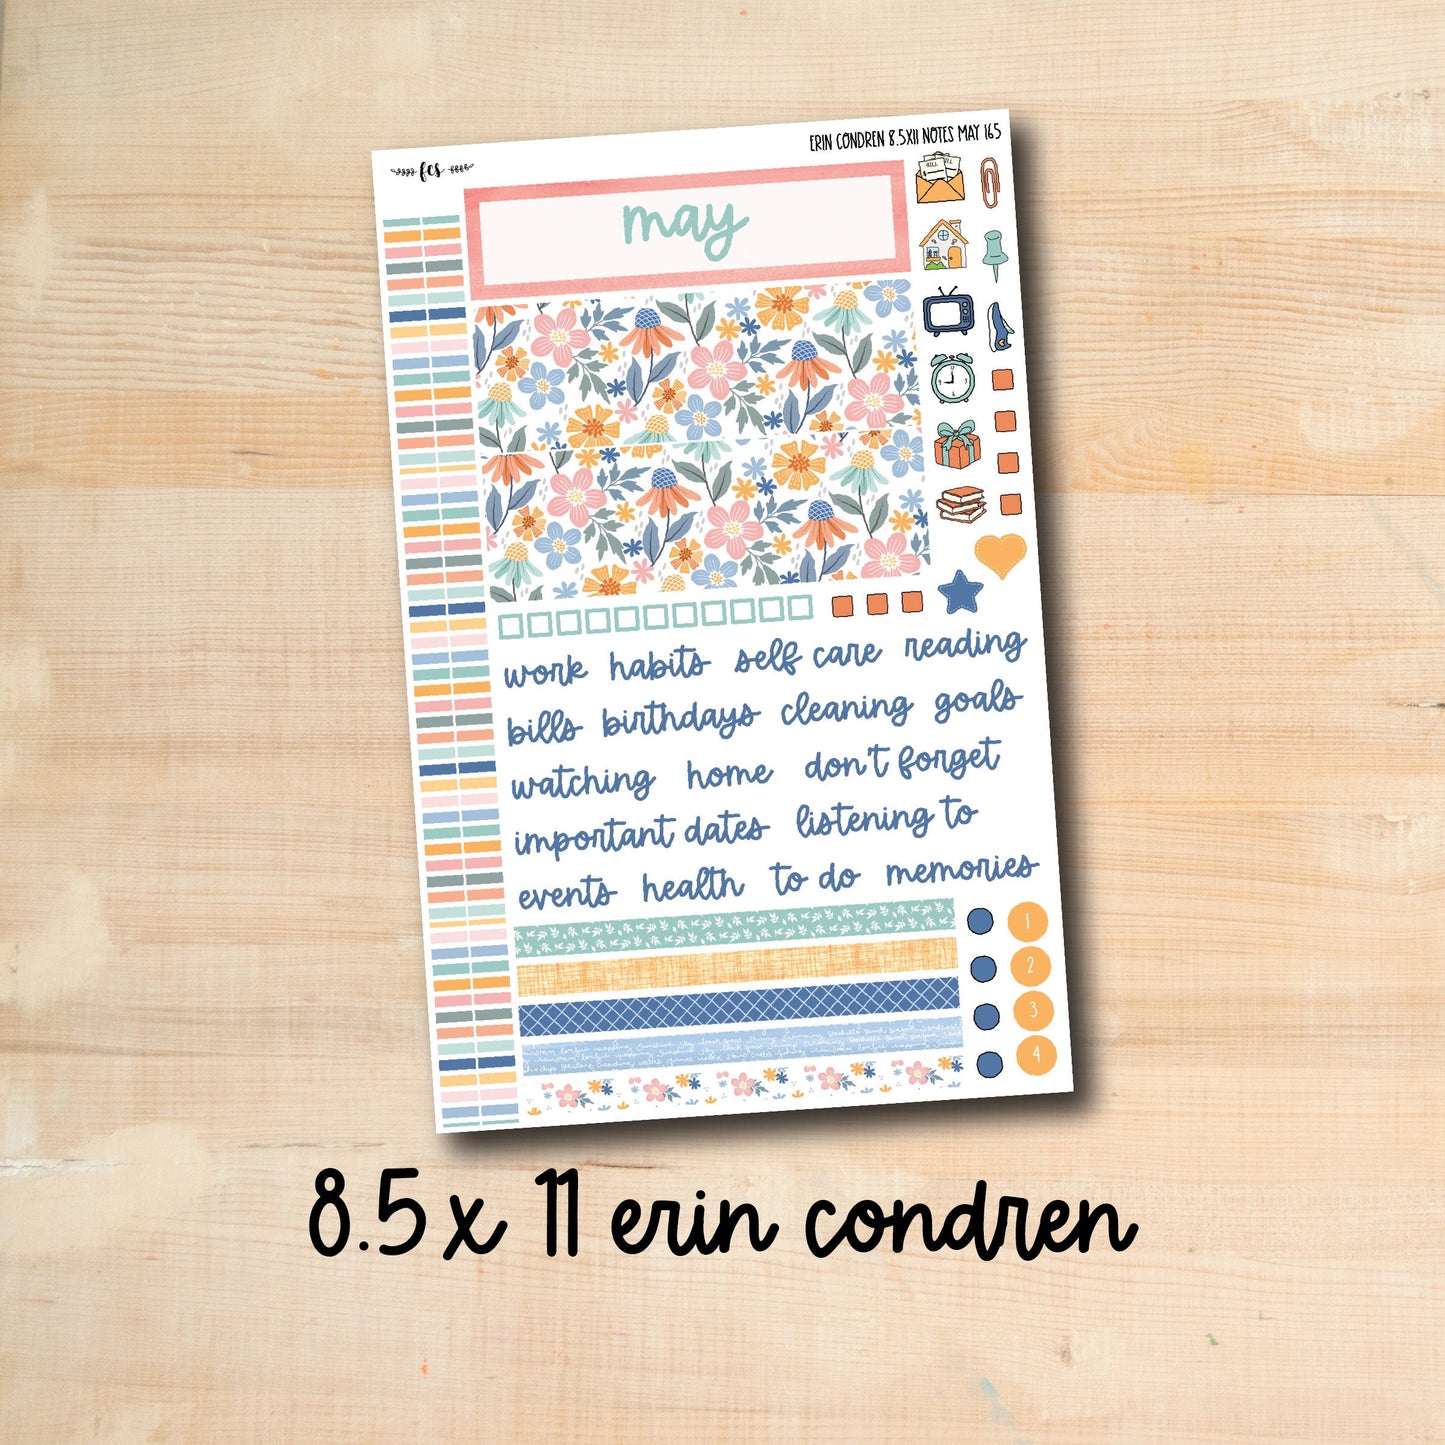 8.5x11 NOTES-MAY165 || BEAUTIFUL DAY Erin Condren 8.5x11 May notes page